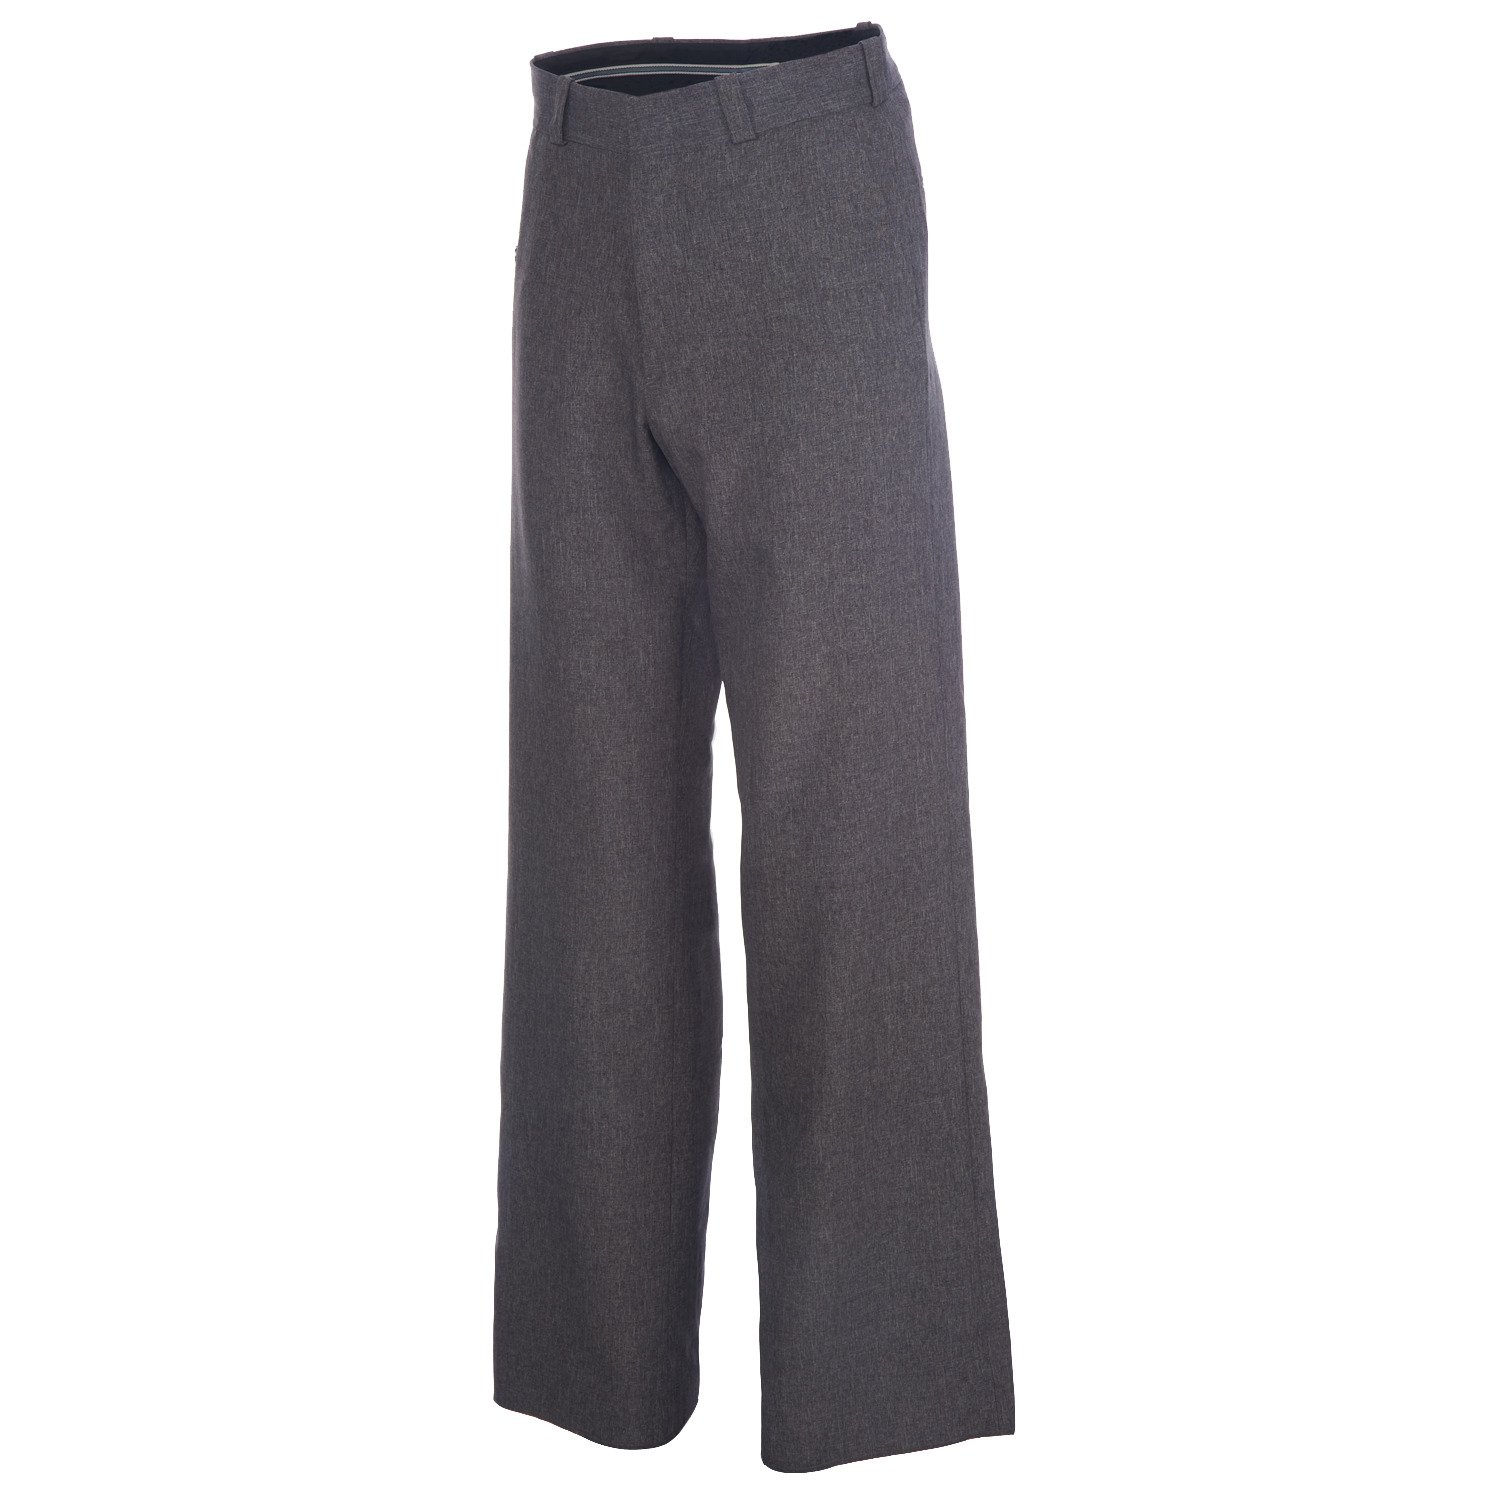 Umpire Pants  Official Finders